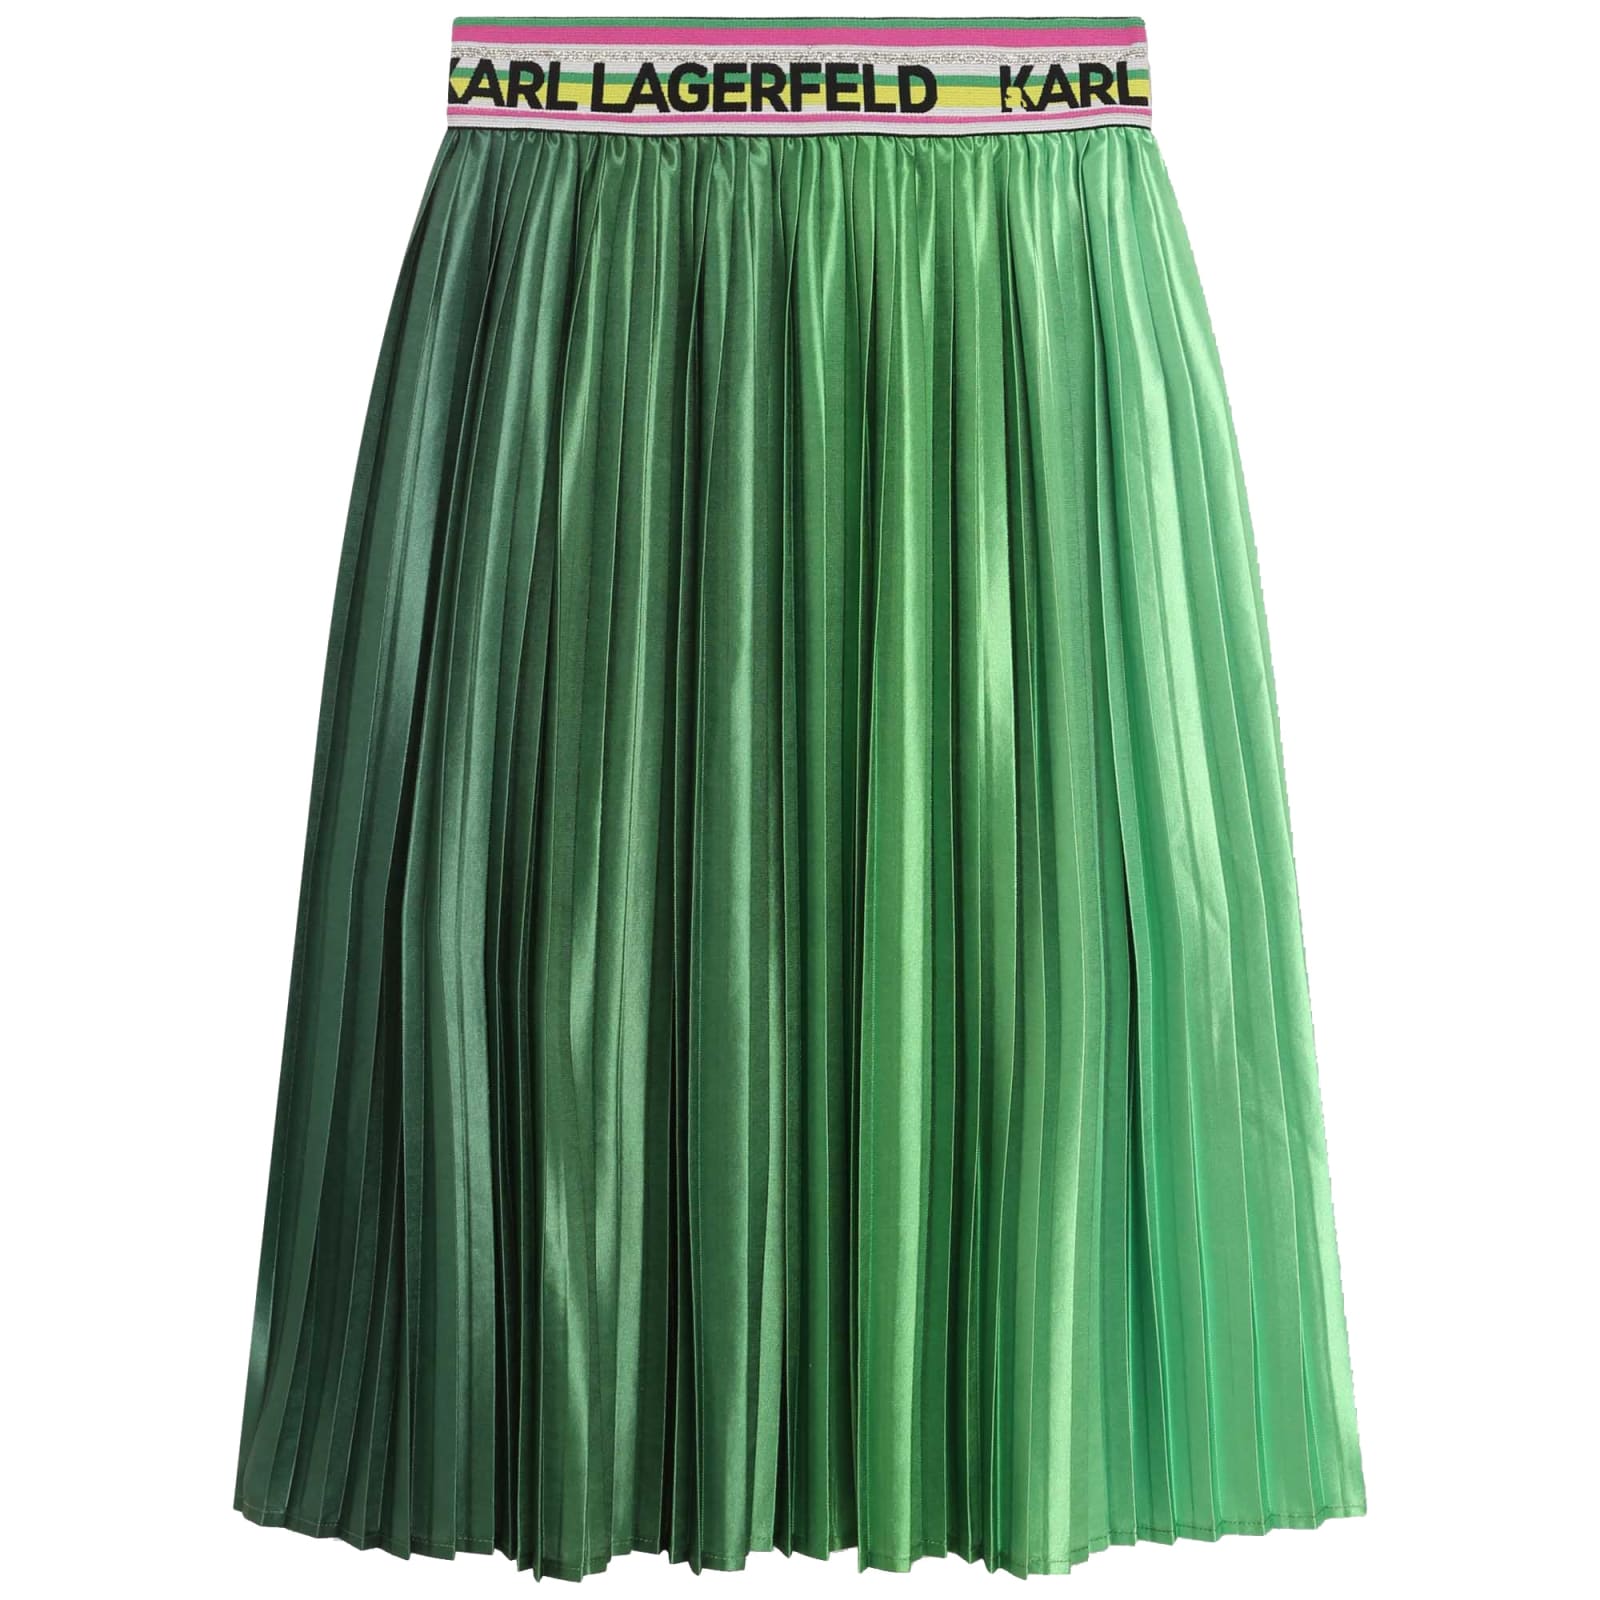 KARL LAGERFELD PLEATED SKIRT WITH LOGO BAND